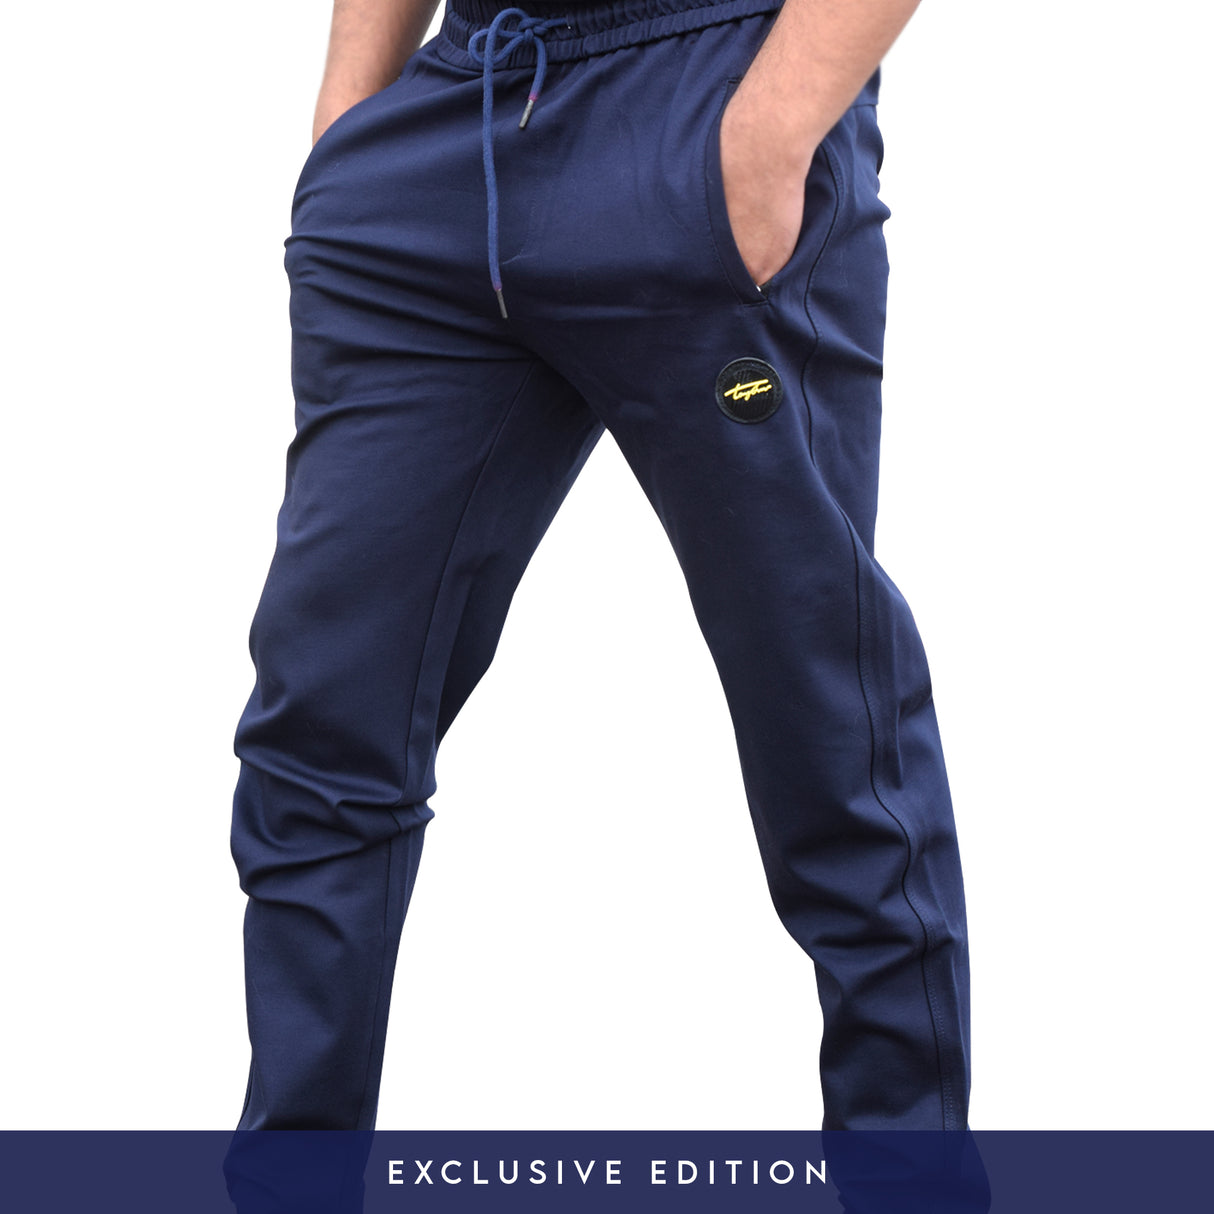 TAPERED GYM SWEATPANTS | NAVY BLUE COLOR | GYM SUPPLEMENTS U.S